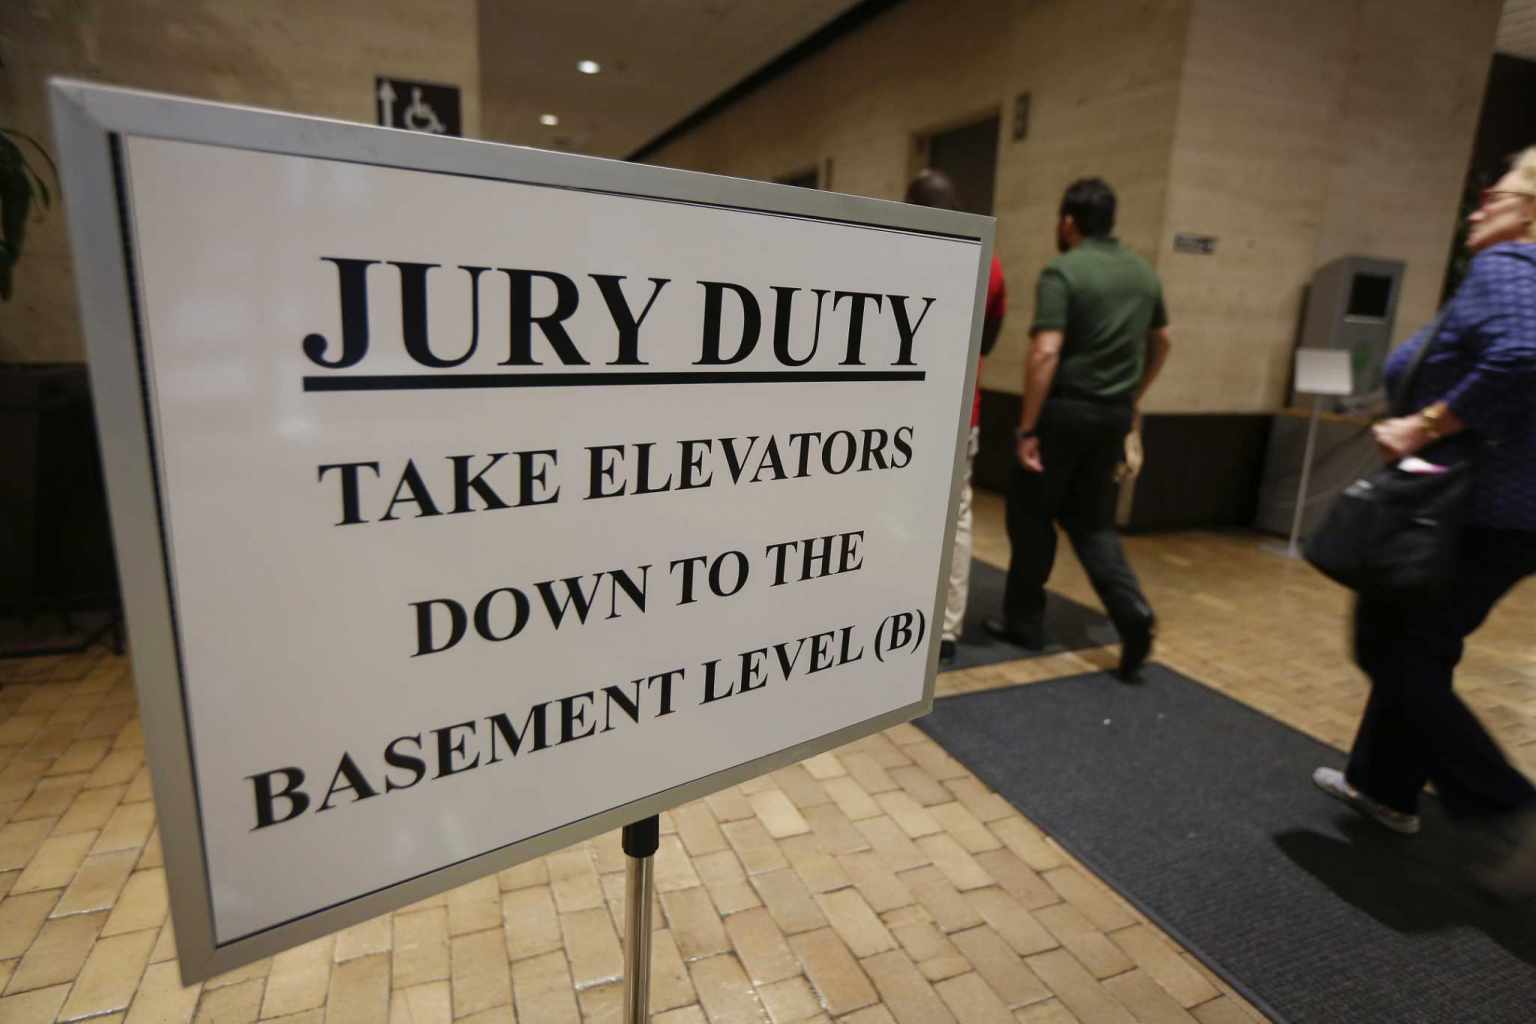 How to Get Out of Jury Duty by Best Excuses and Options